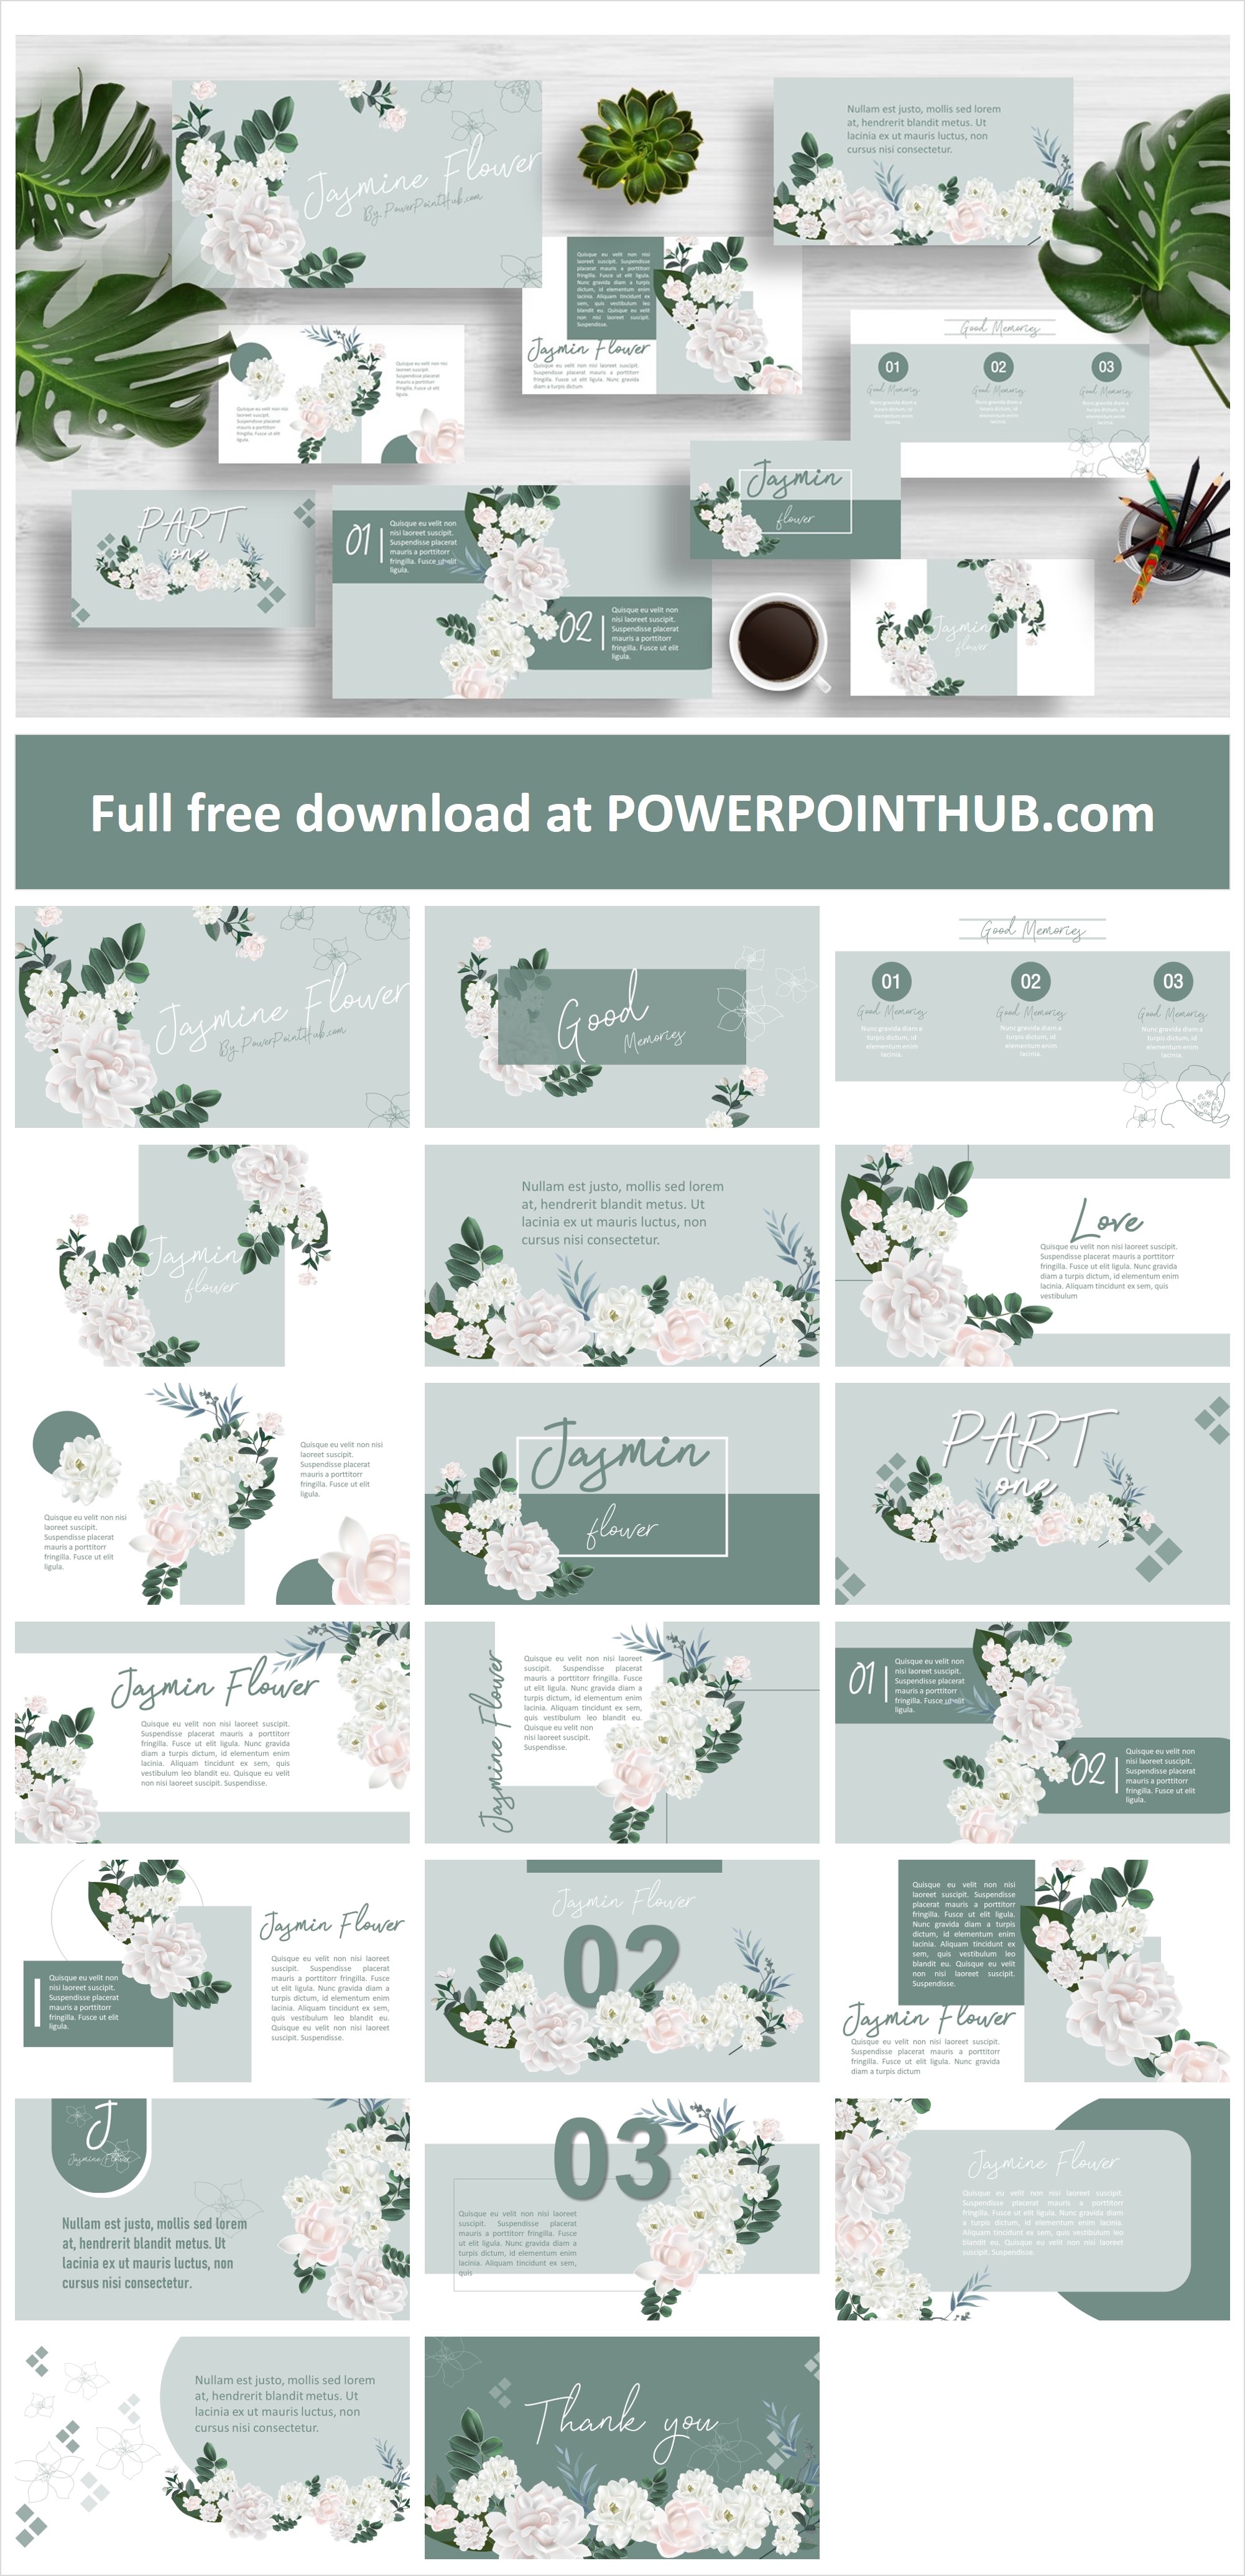 Free Jasmine Flower PowerPoint Template is a beautiful template with jasmine flowers. You can download this free PPT template to make PowerPoint presentations.